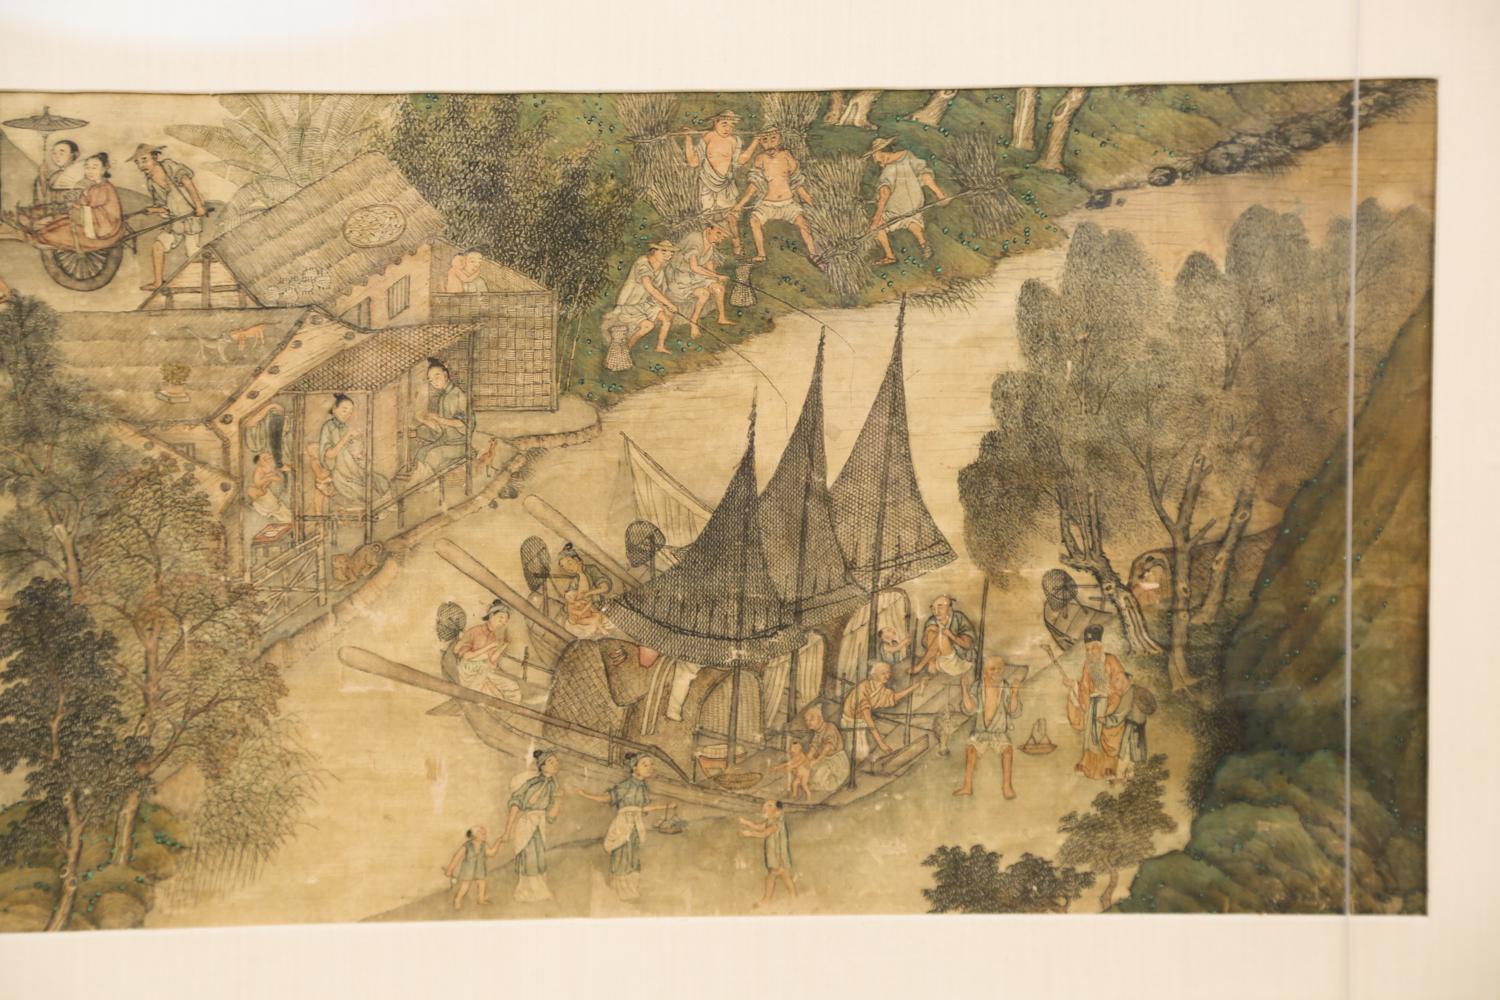 Chinese_Handscroll_Mounted_in_Frame_Colored_Ink_on_Silk_18th-19th_Century953_2